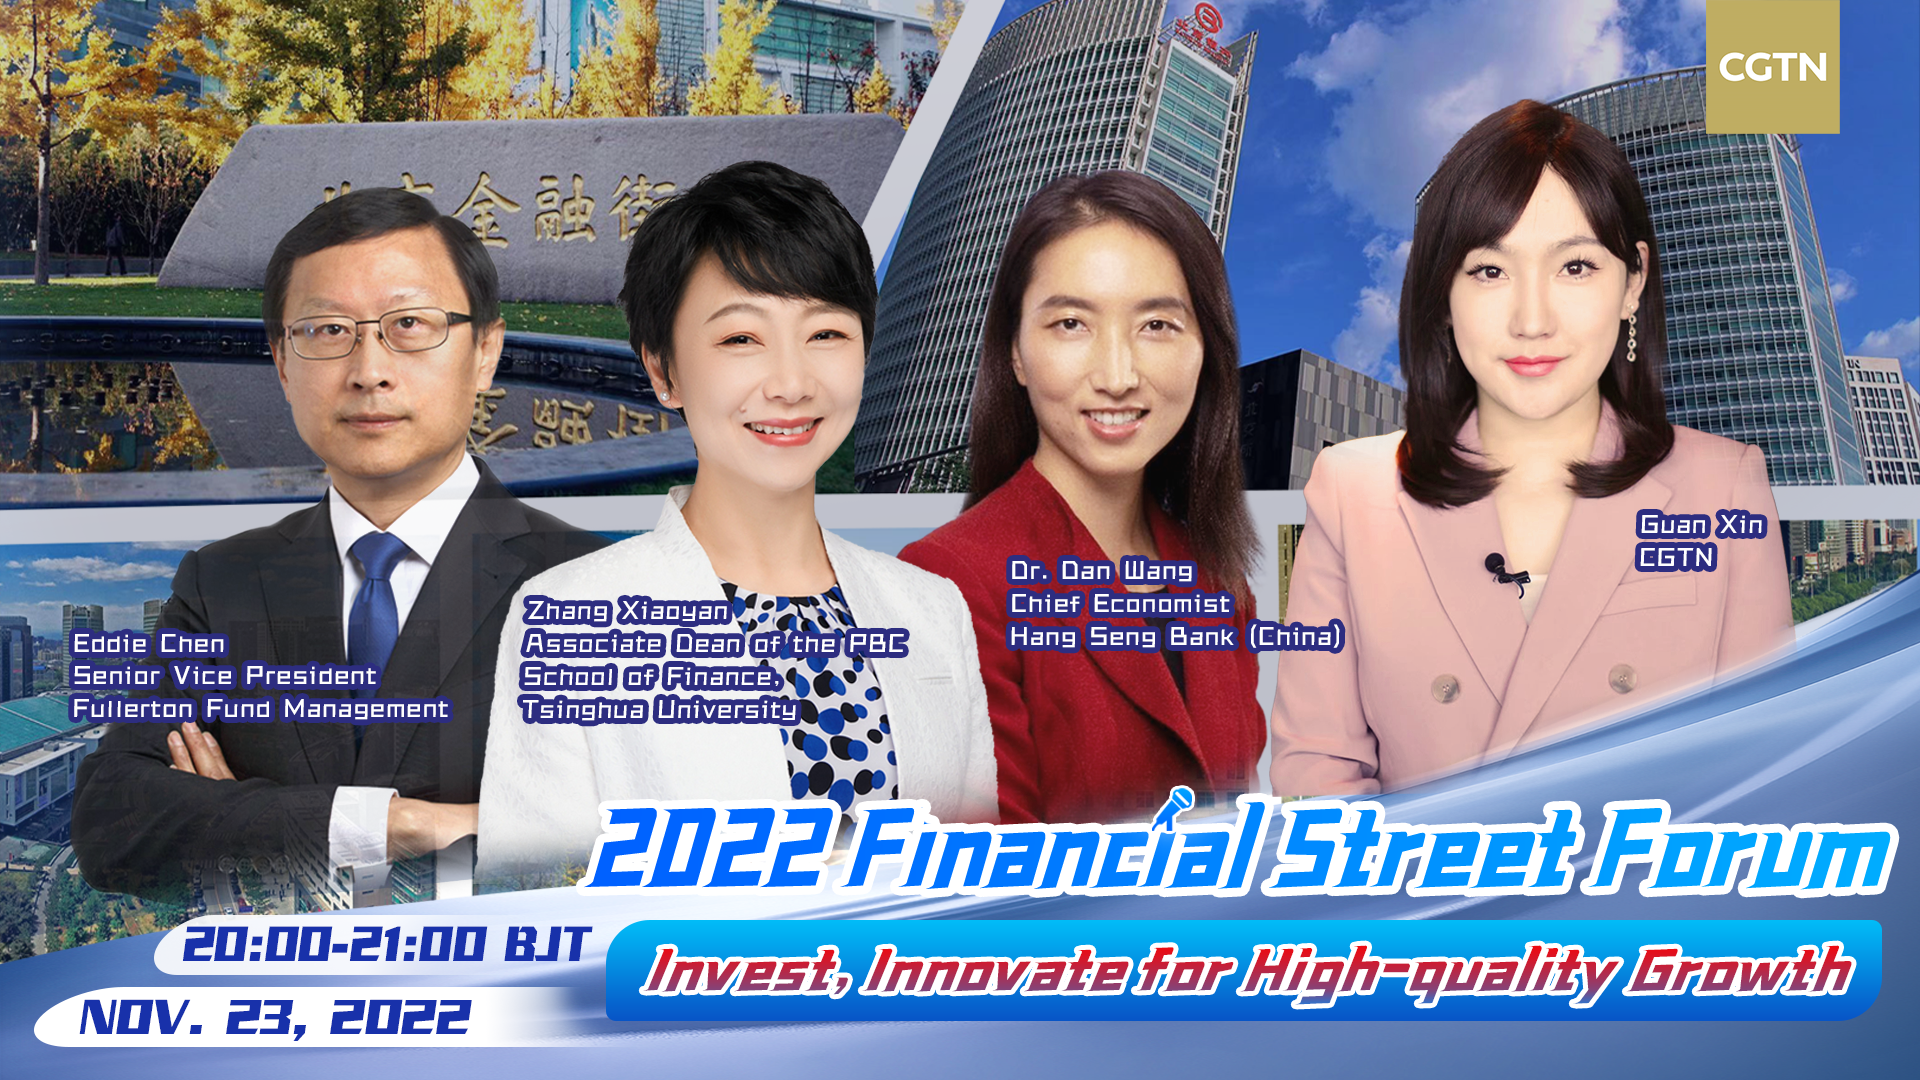 Live: 2022 Financial Street Forum: Invest, innovate for high-quality growth